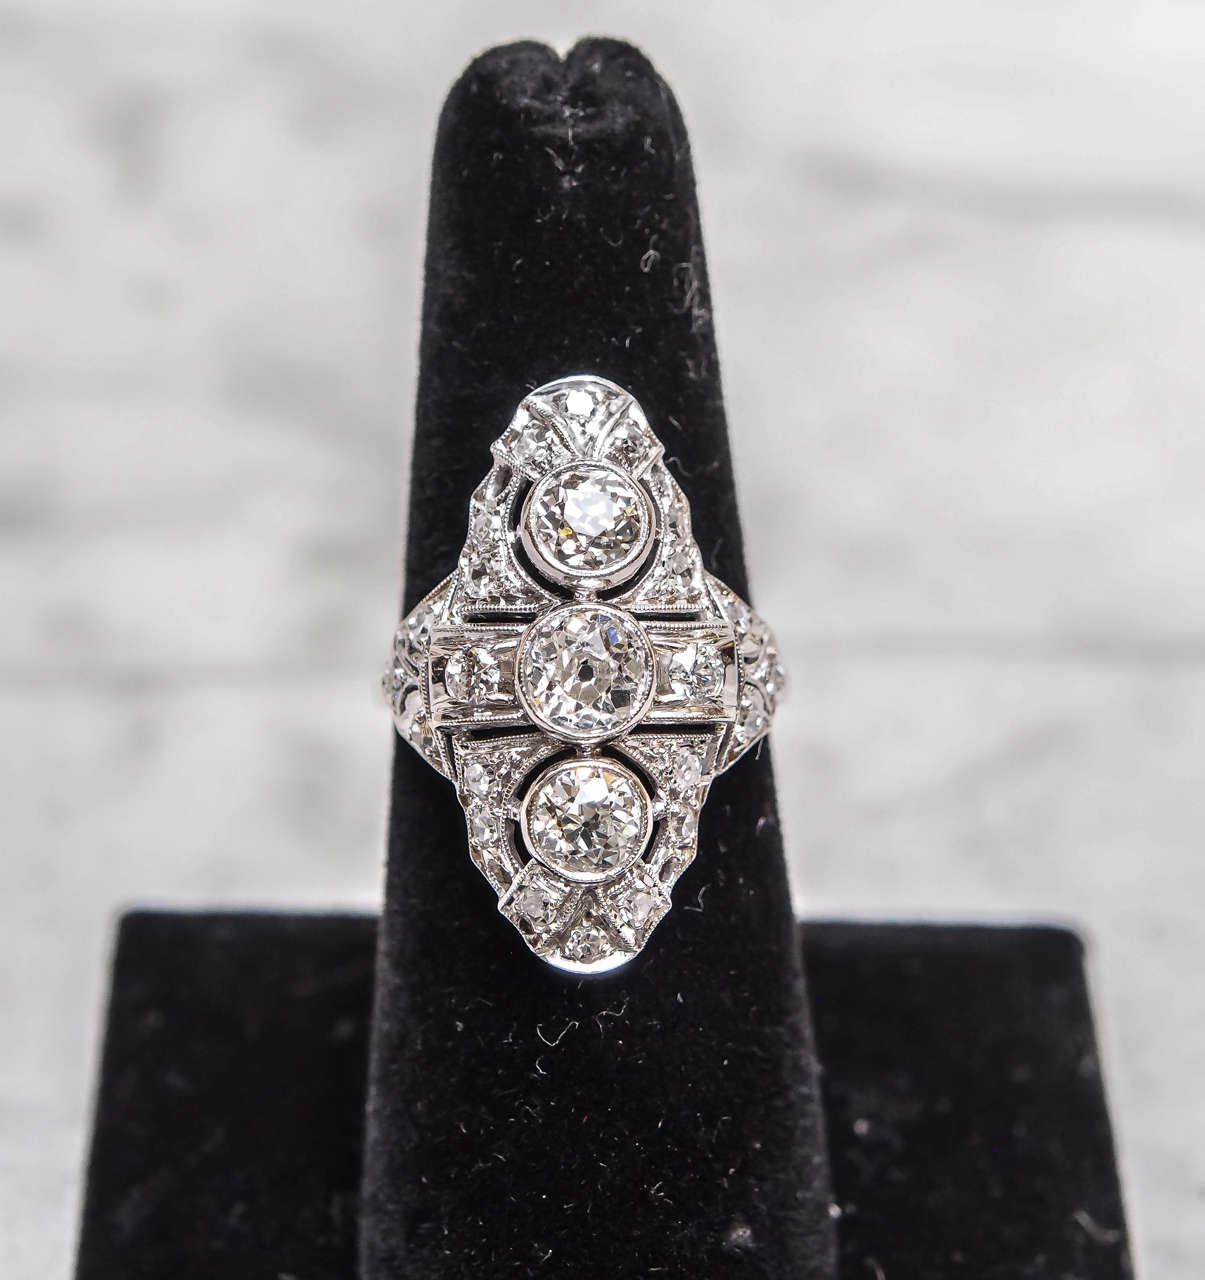 Period Art Deco Diamond Ring. The ring has three large diamonds down the center. The center diamond weighs approx. .75cts and the diamonds on either side weigh approx. .65cts each. The smaller diamonds around the ring weigh approx. .50cts. The total